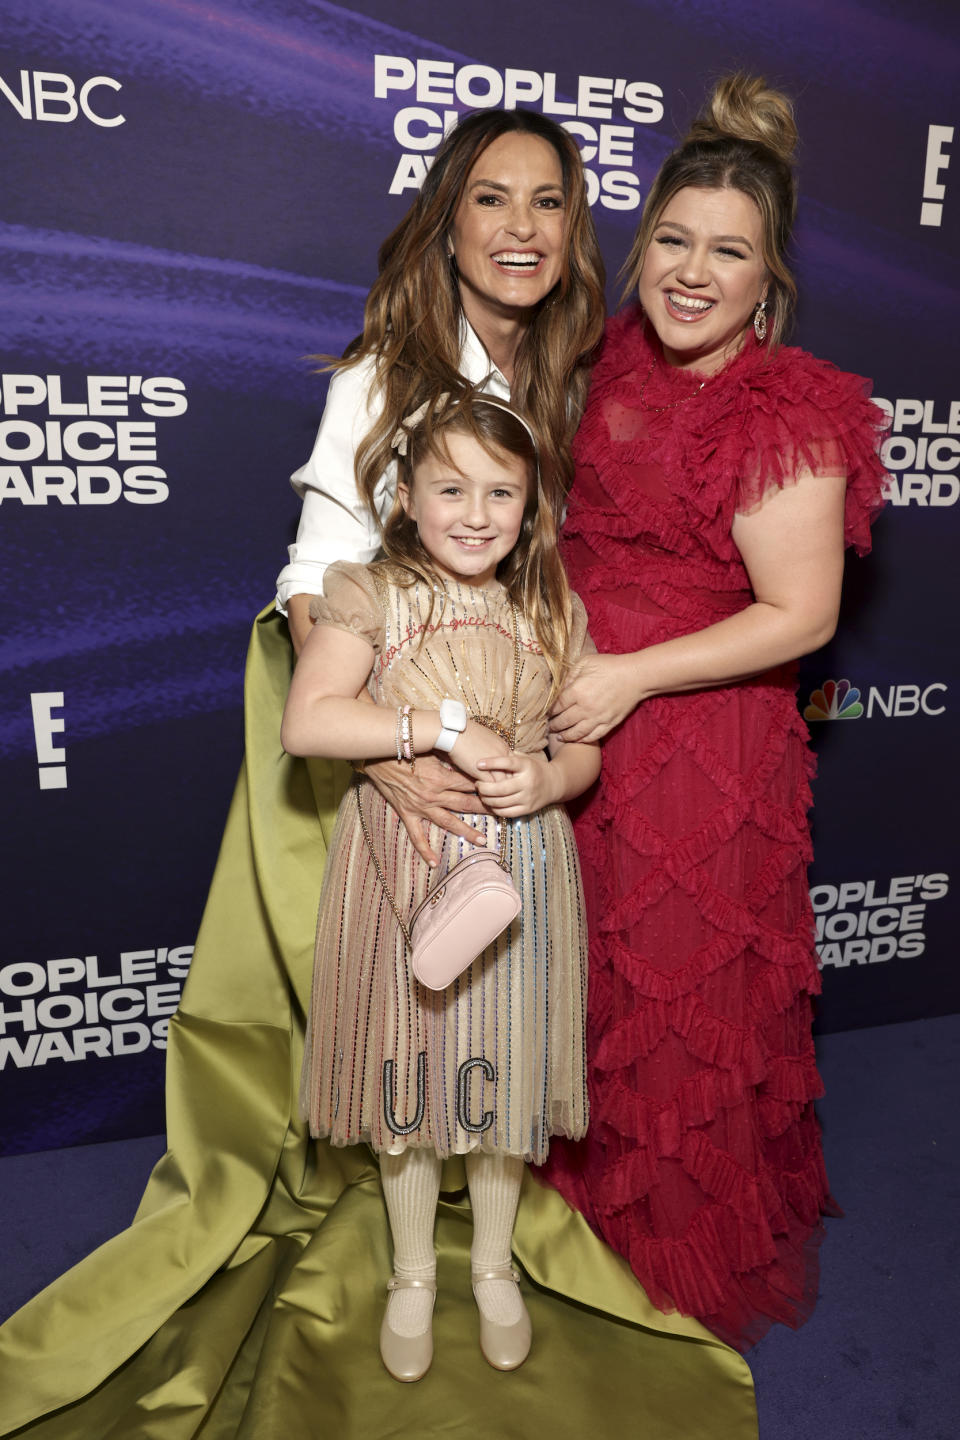 Mariska Hargitay, Kelly Clarkson and her daughter, River Rose Blackstock, posing for photos at the People's Choice Awards at the Barker Hangar on Dec. 6, 2022 in Santa Monica, California.  (Todd Williamson / E! Entertainment/NBC via Getty Images)